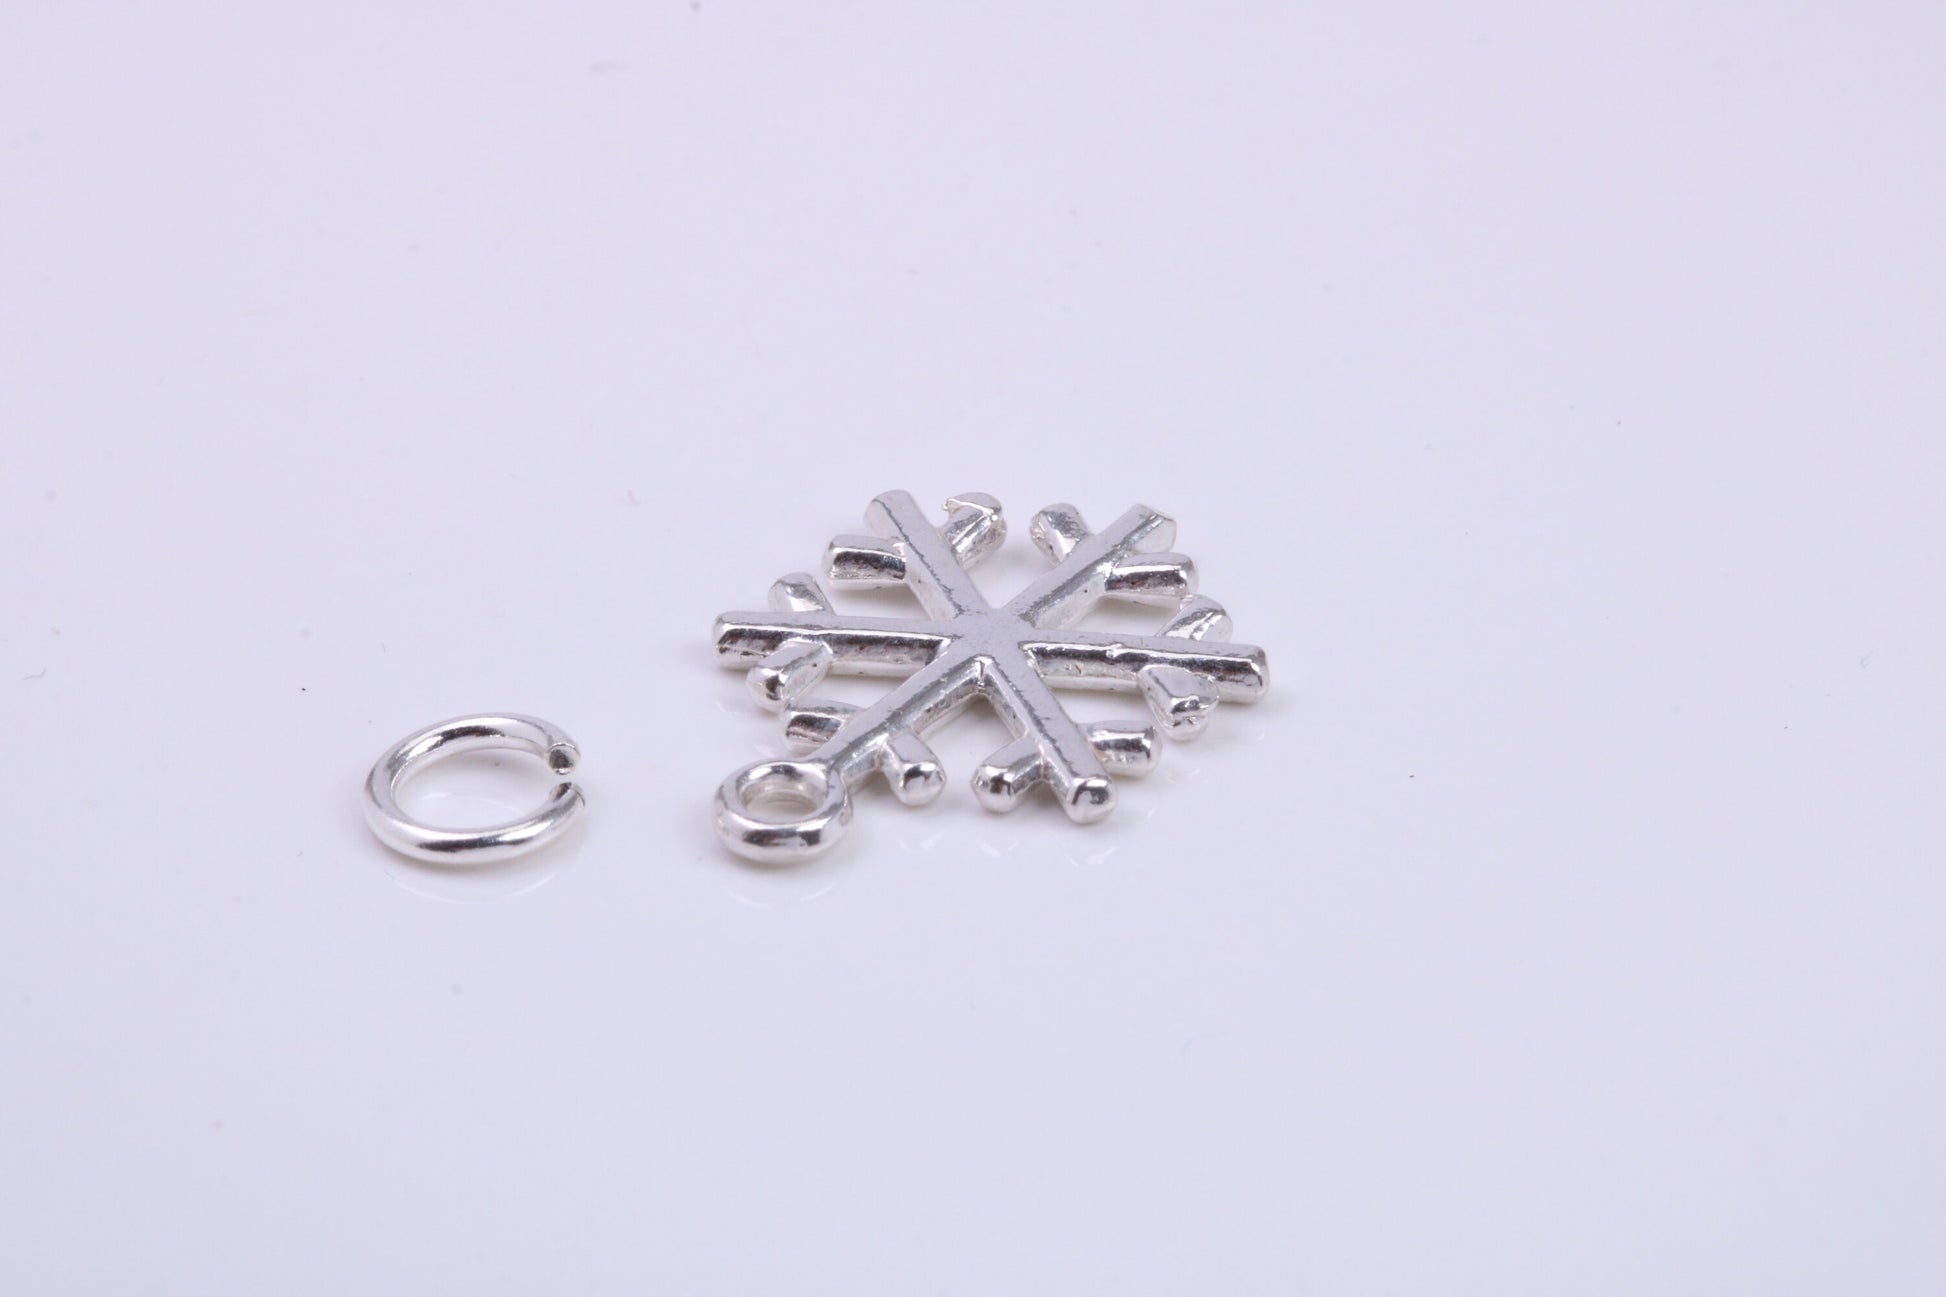 Snow Flake Charm, Traditional Charm, Made from Solid 925 Grade Sterling Silver, Complete with Attachment Link